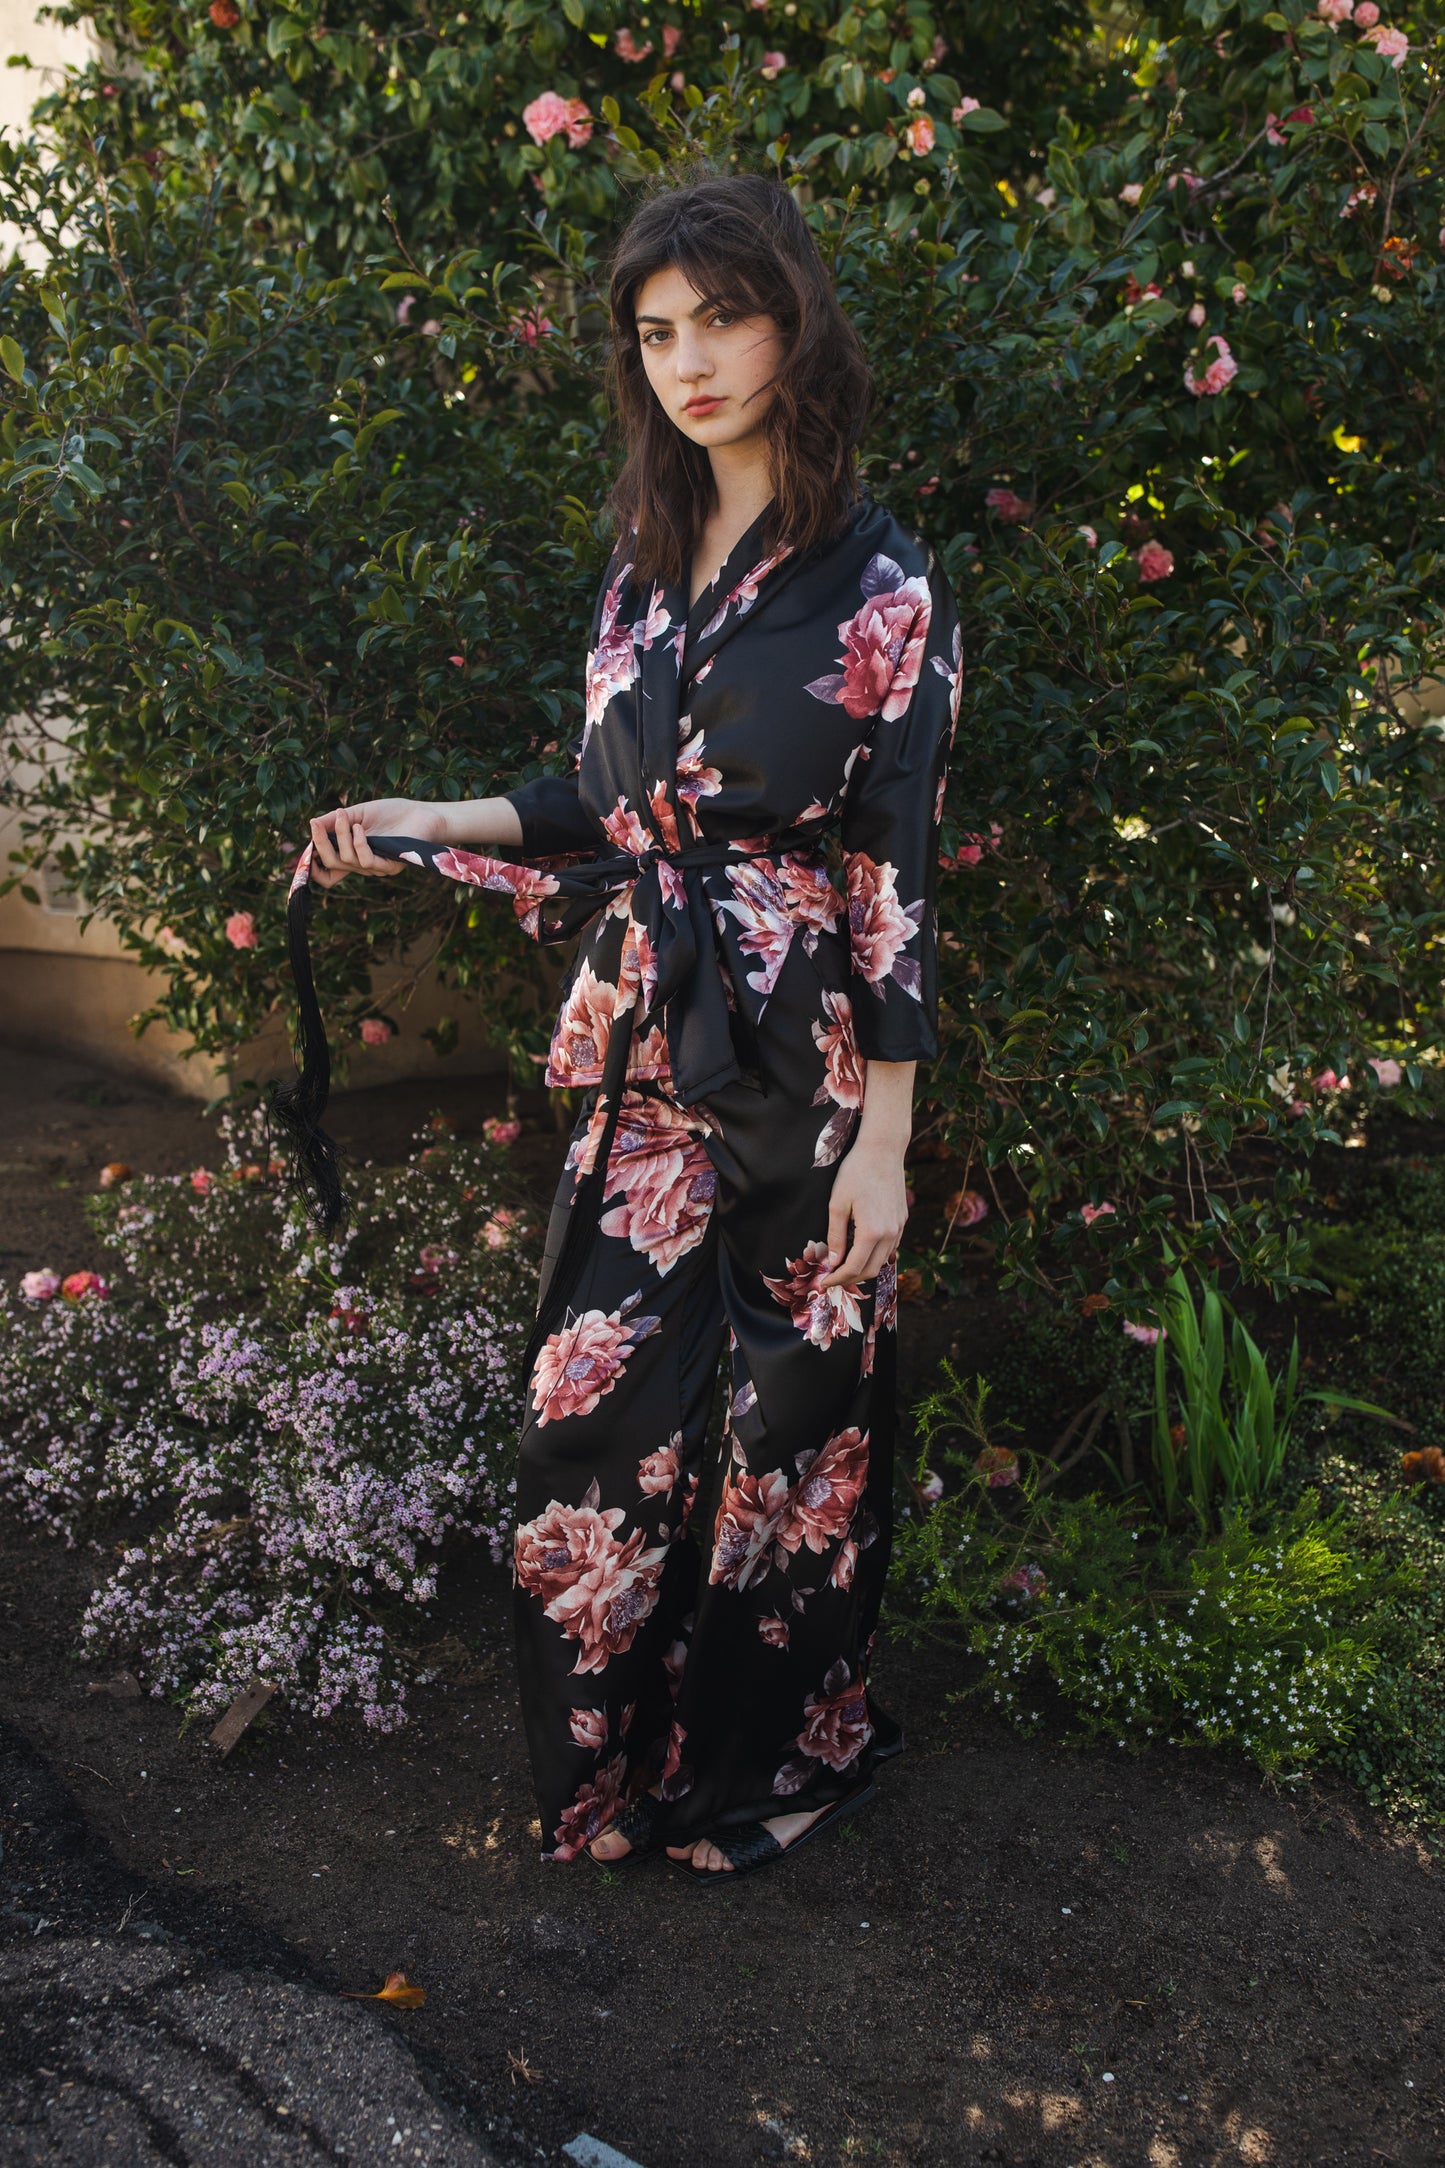 jennafer grace Erebos dolman palazzo set silky black georgette with vibrant pink floral print matching co-ord coord set wrap blouse top with tasseled belt and palazzo pant with pockets and elastic waist boho bohemian hippie romantic whimsical glamorous pajamas pjs glam lounge wear handmade in california usa